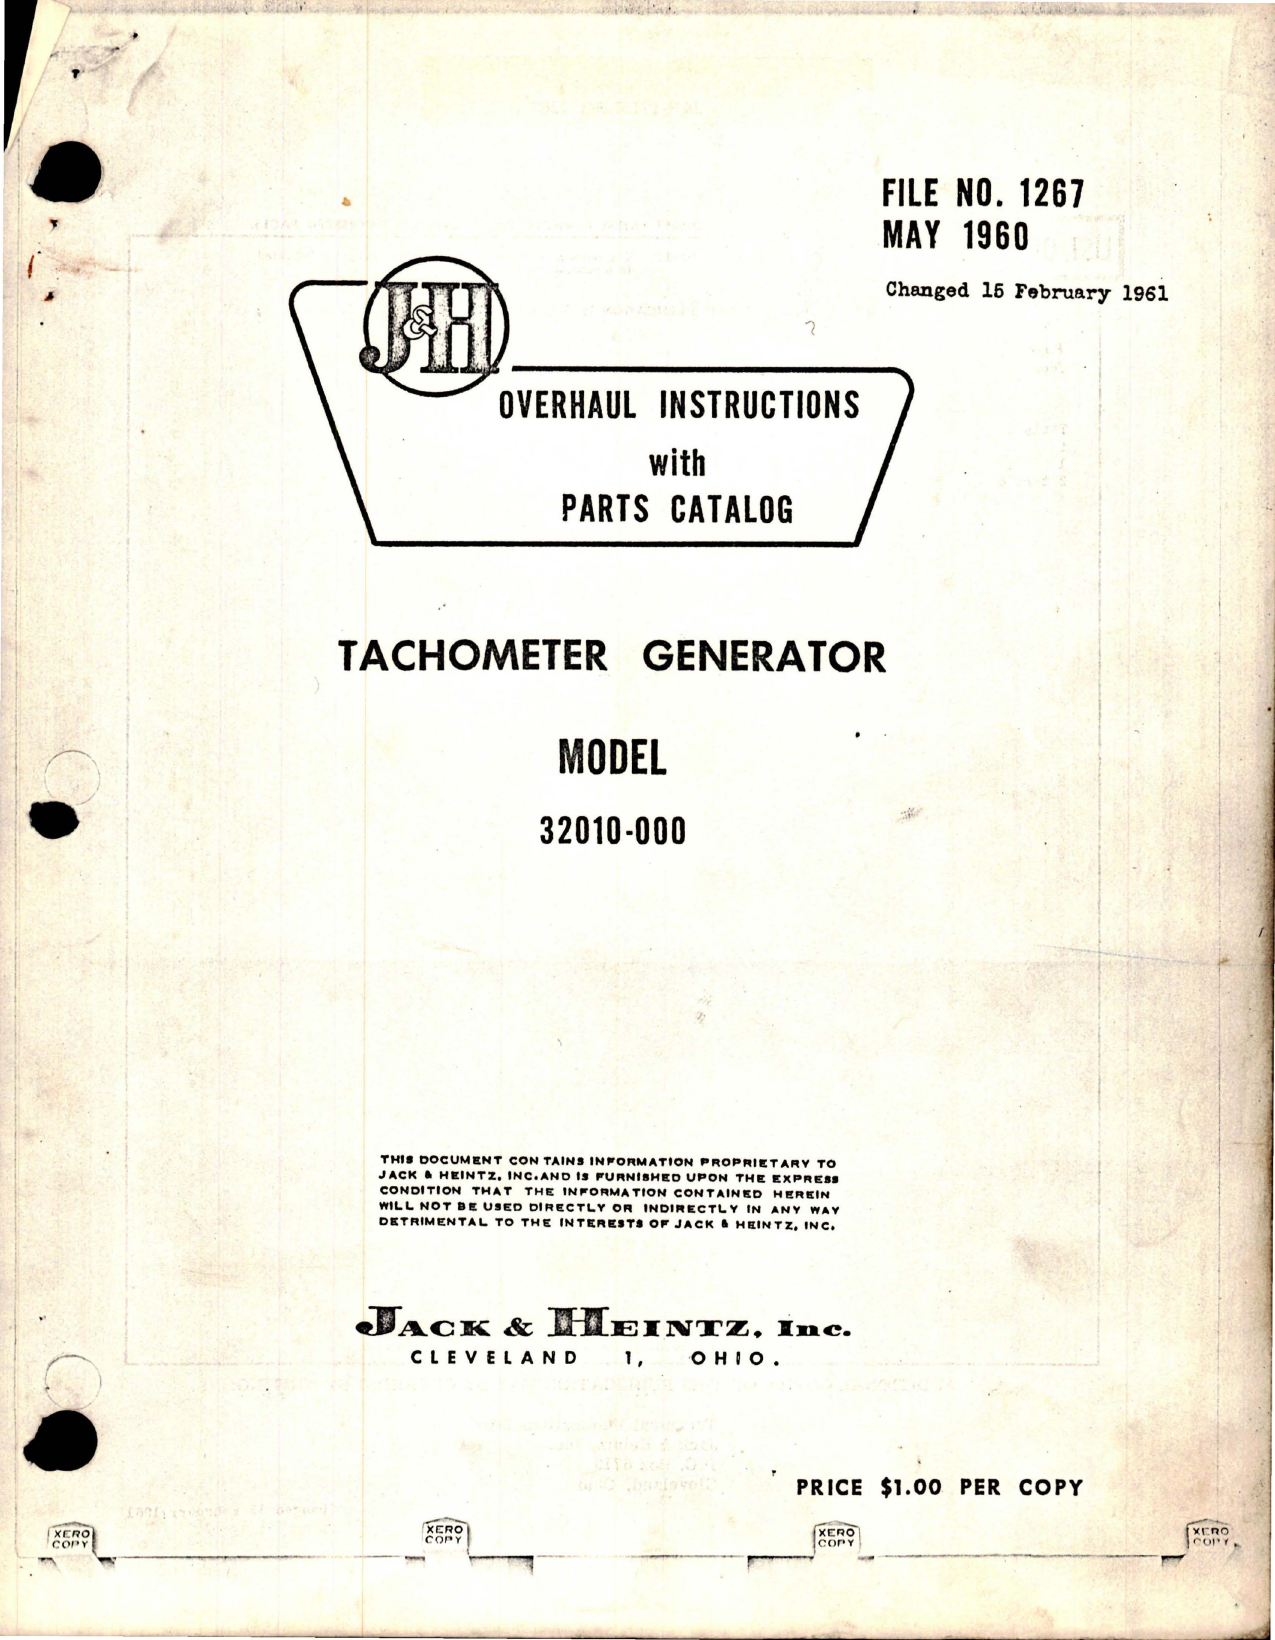 Sample page 1 from AirCorps Library document: Overhaul Instructions with Parts Catalog for Tachometer Generator - Model 32010-000